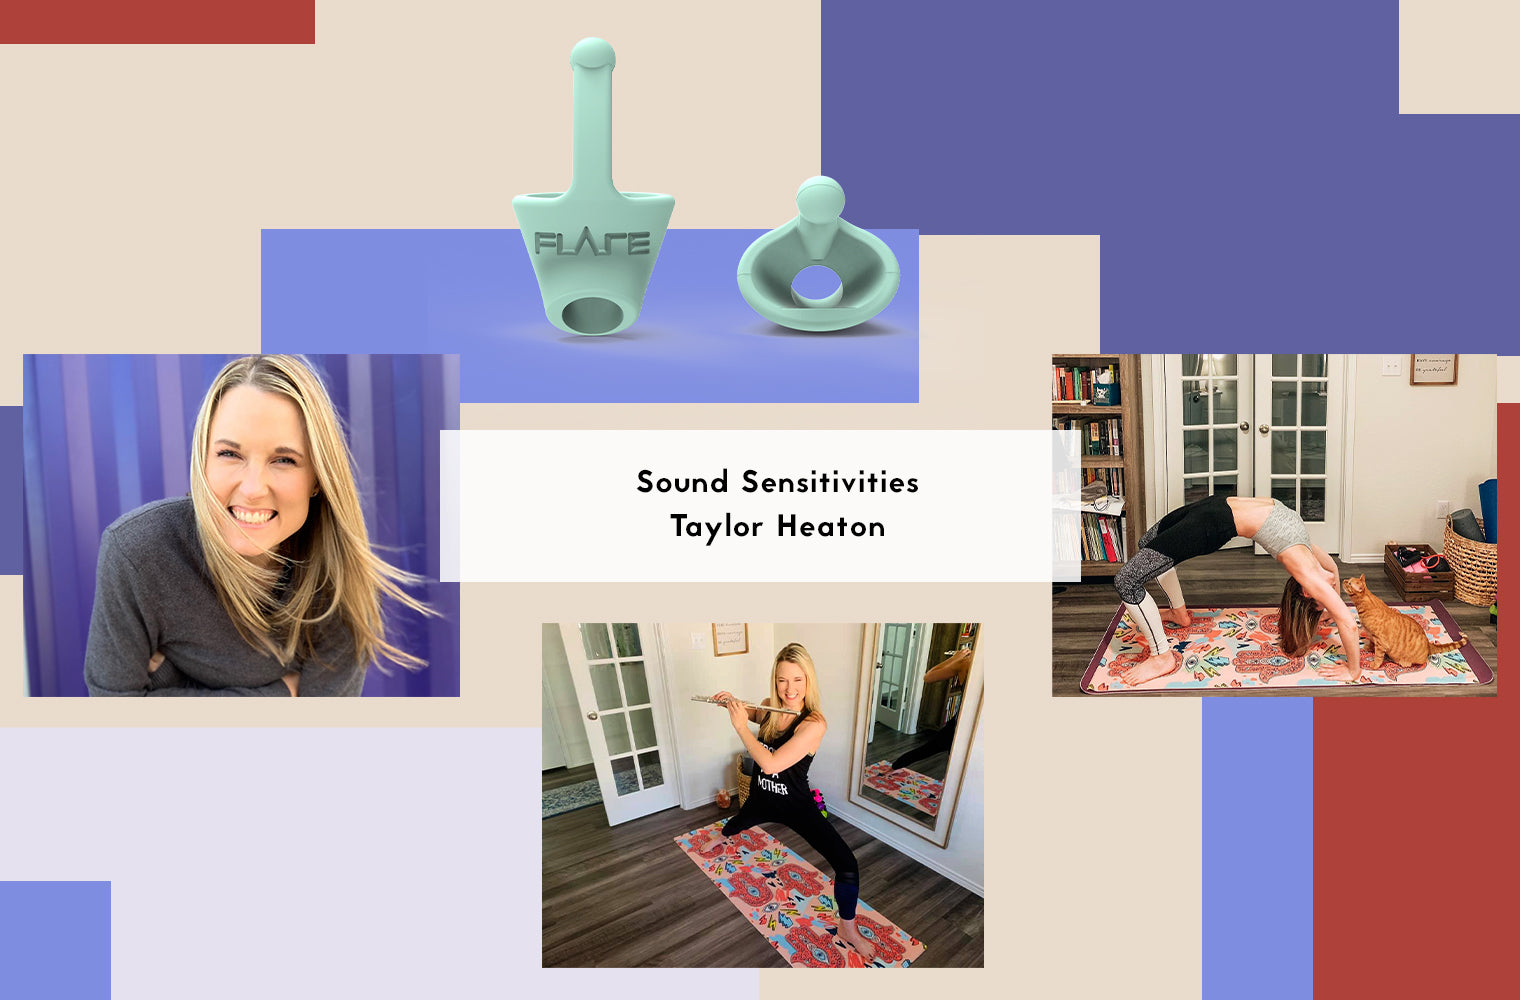 A blog about sound sensitivities by Taylor Heaton